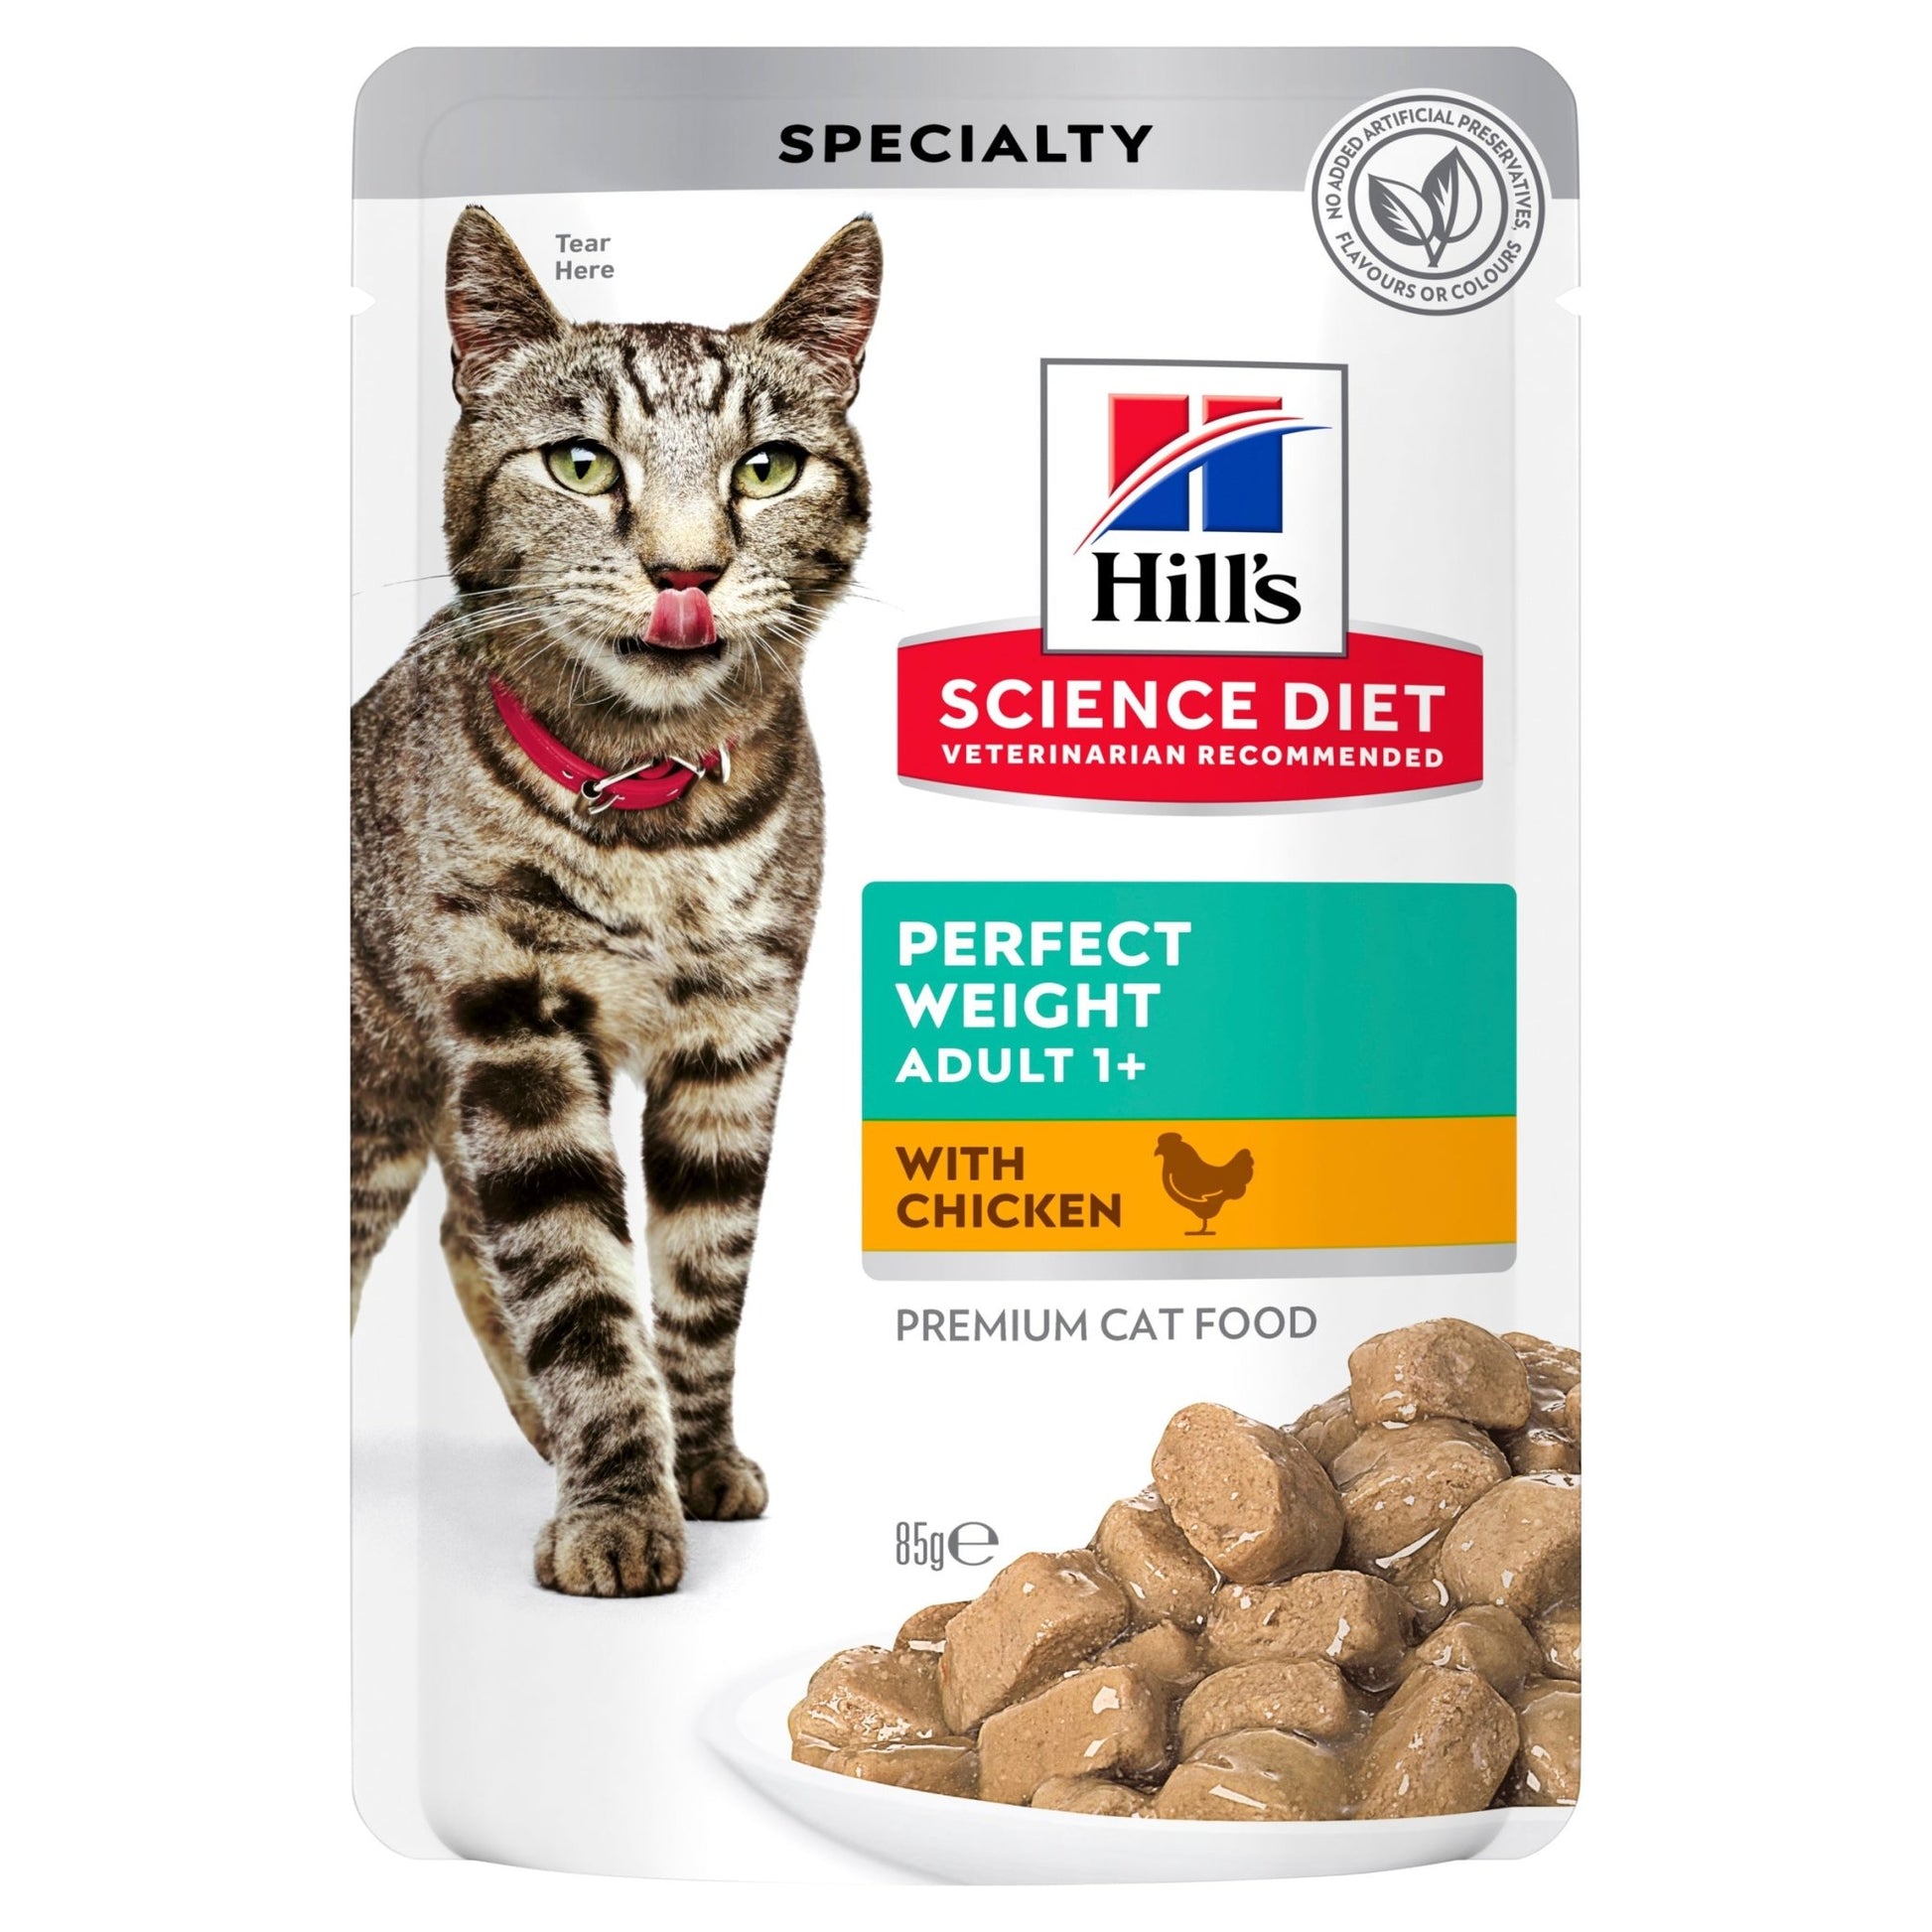 Hill's Science Diet Adult Perfect Weight Chicken Cat Food pouches 12x85g - Woonona Petfood & Produce